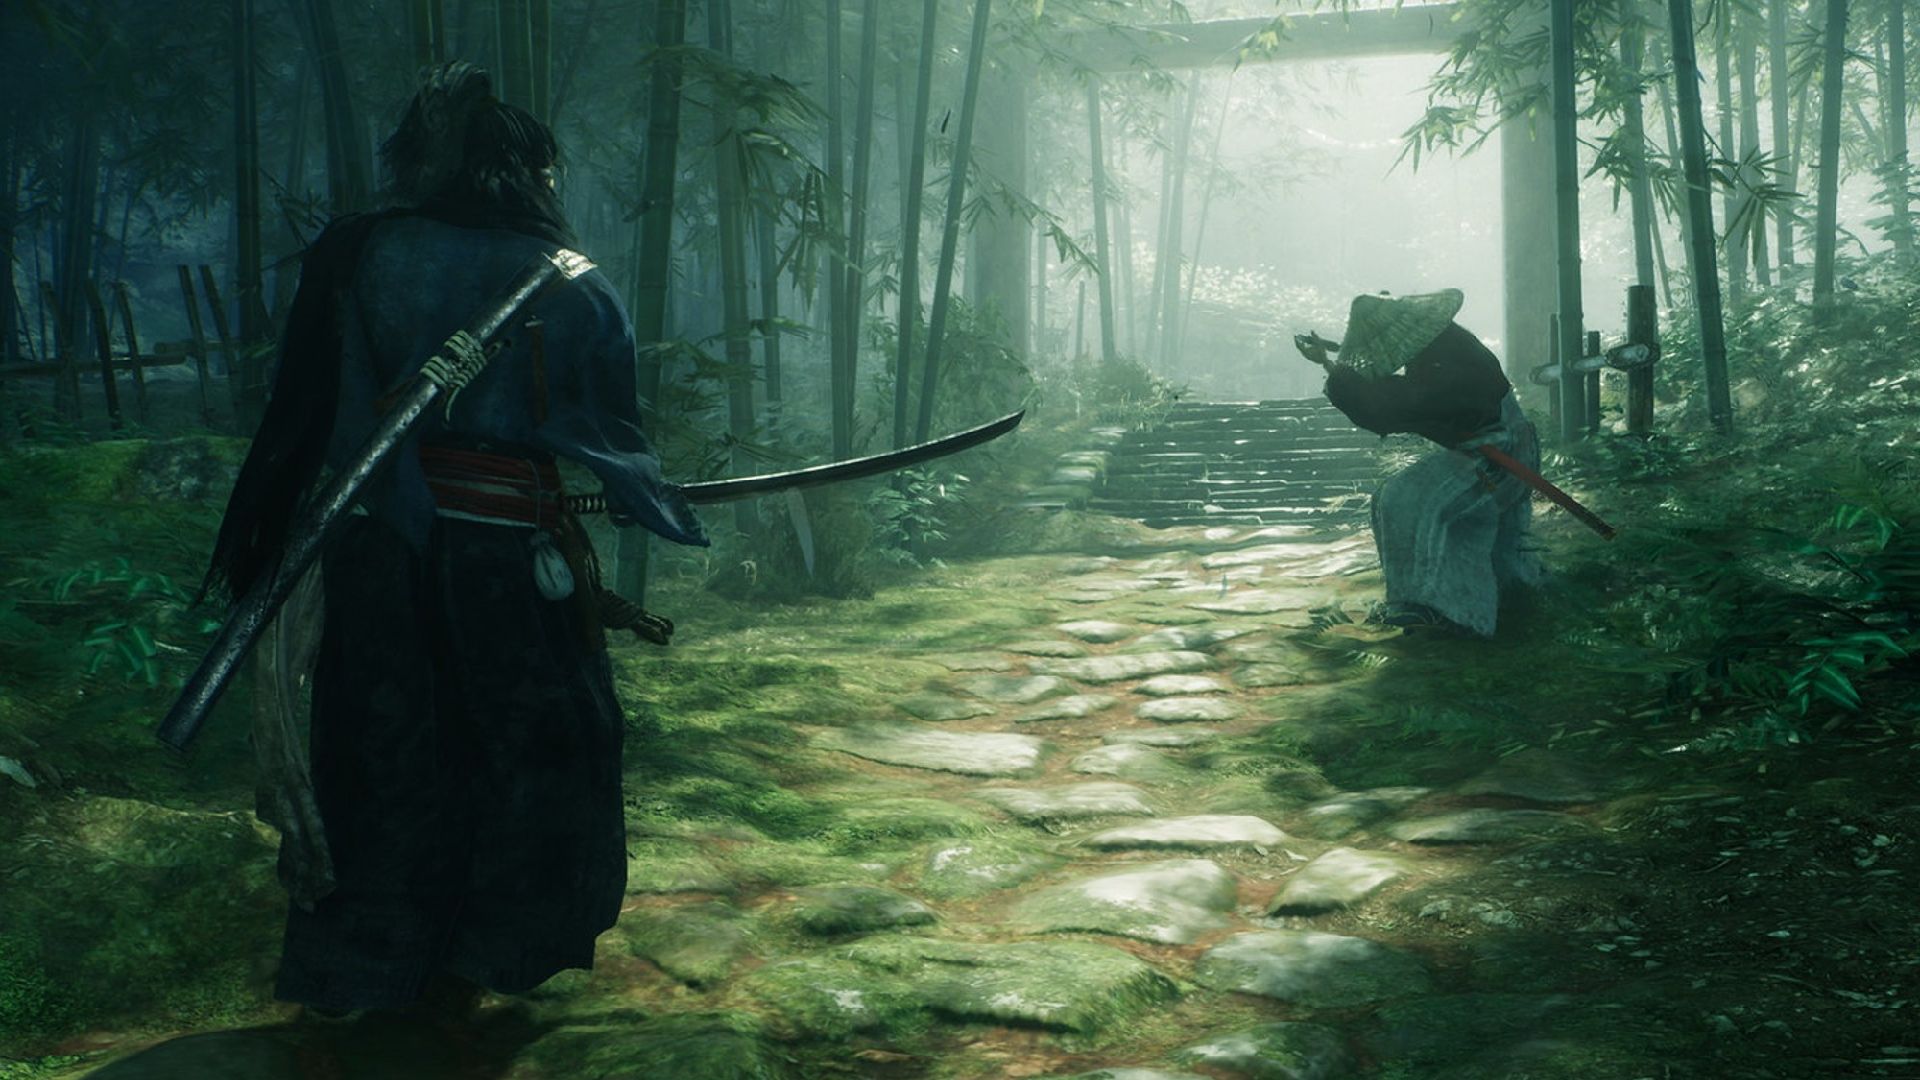 The player fighting a bandit in Rise of the Ronin